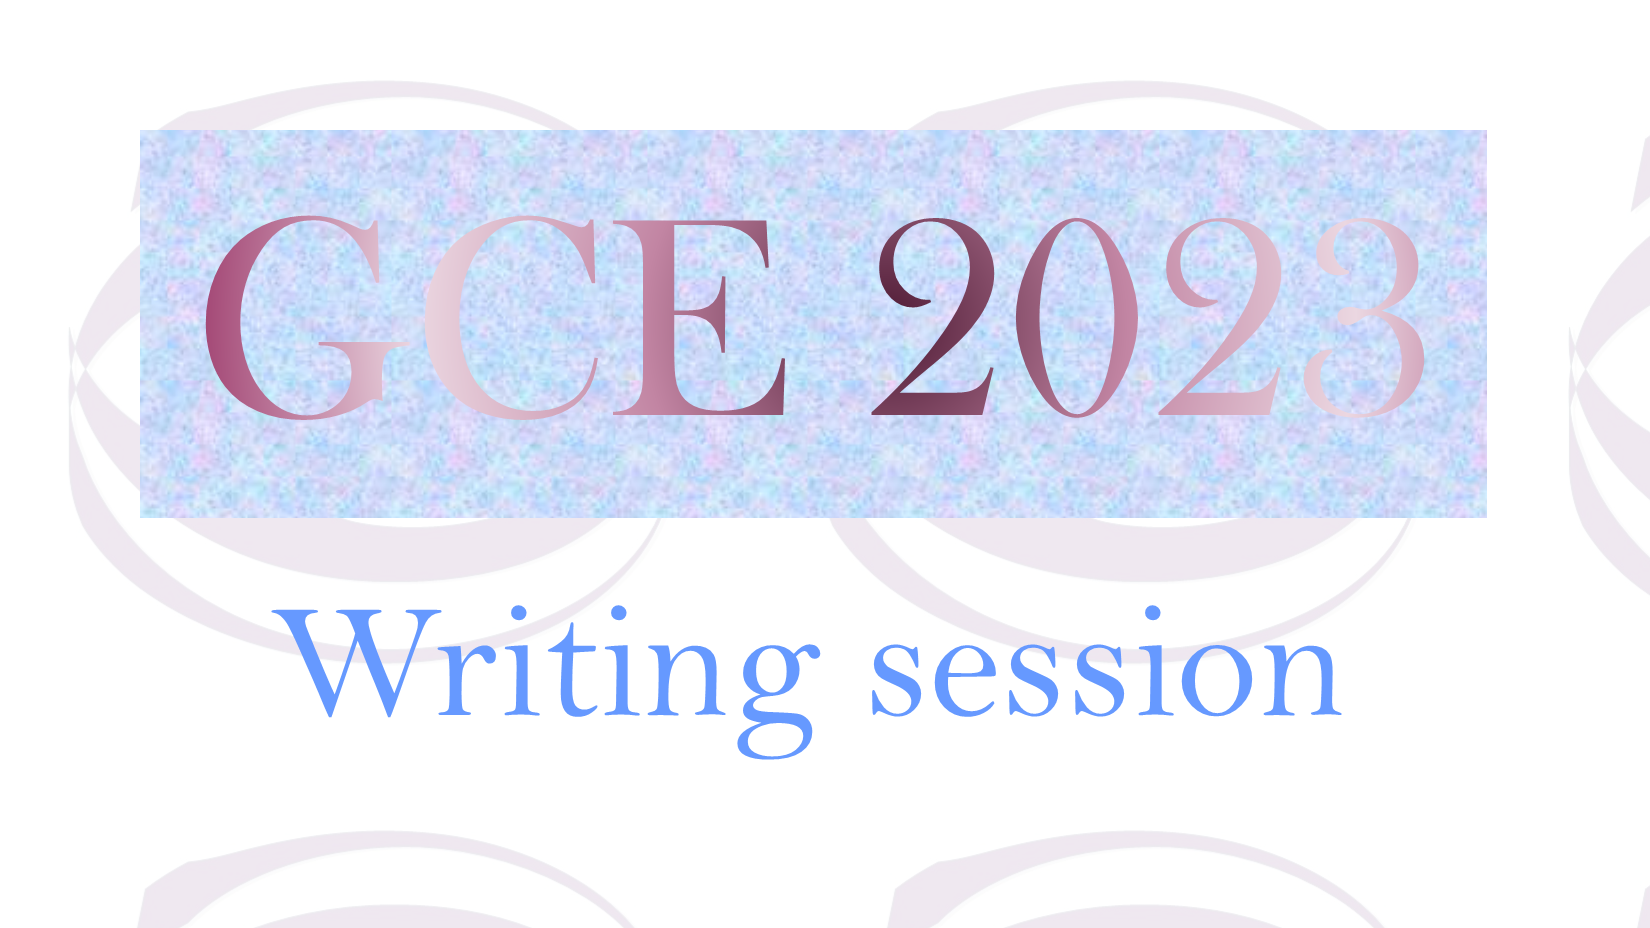 GCE 2023 WRITING SESSION